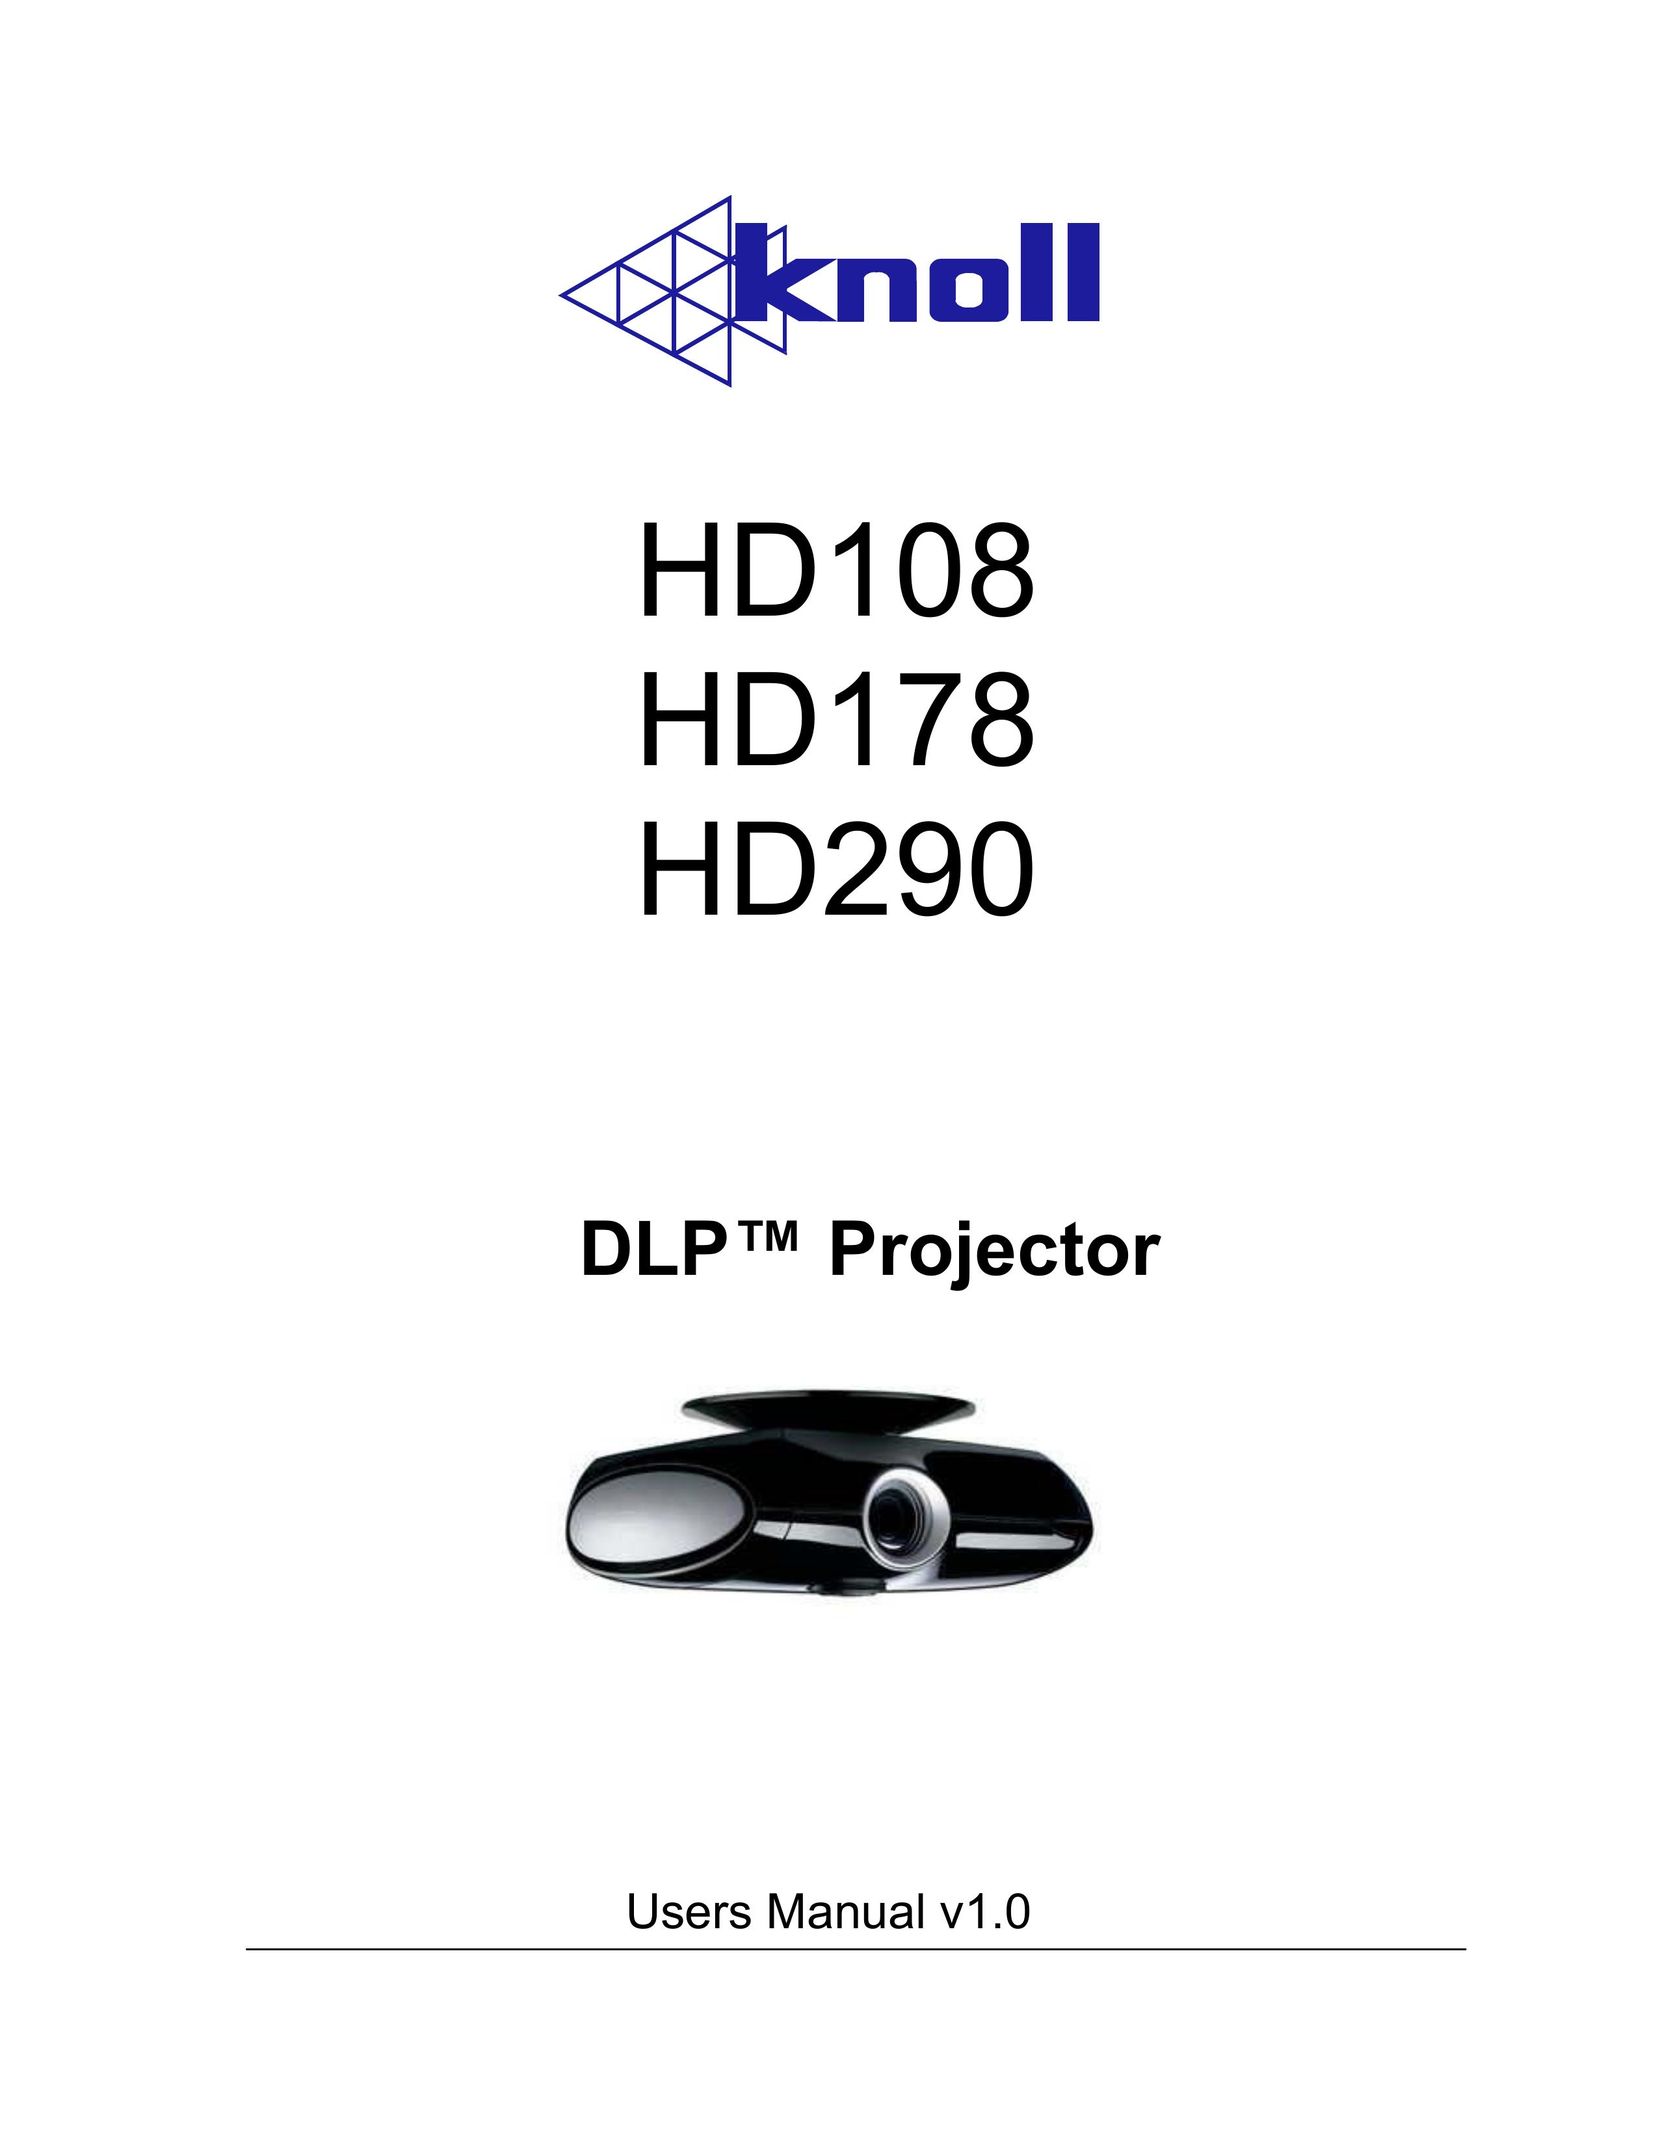 Knoll Systems HD178 Projector User Manual